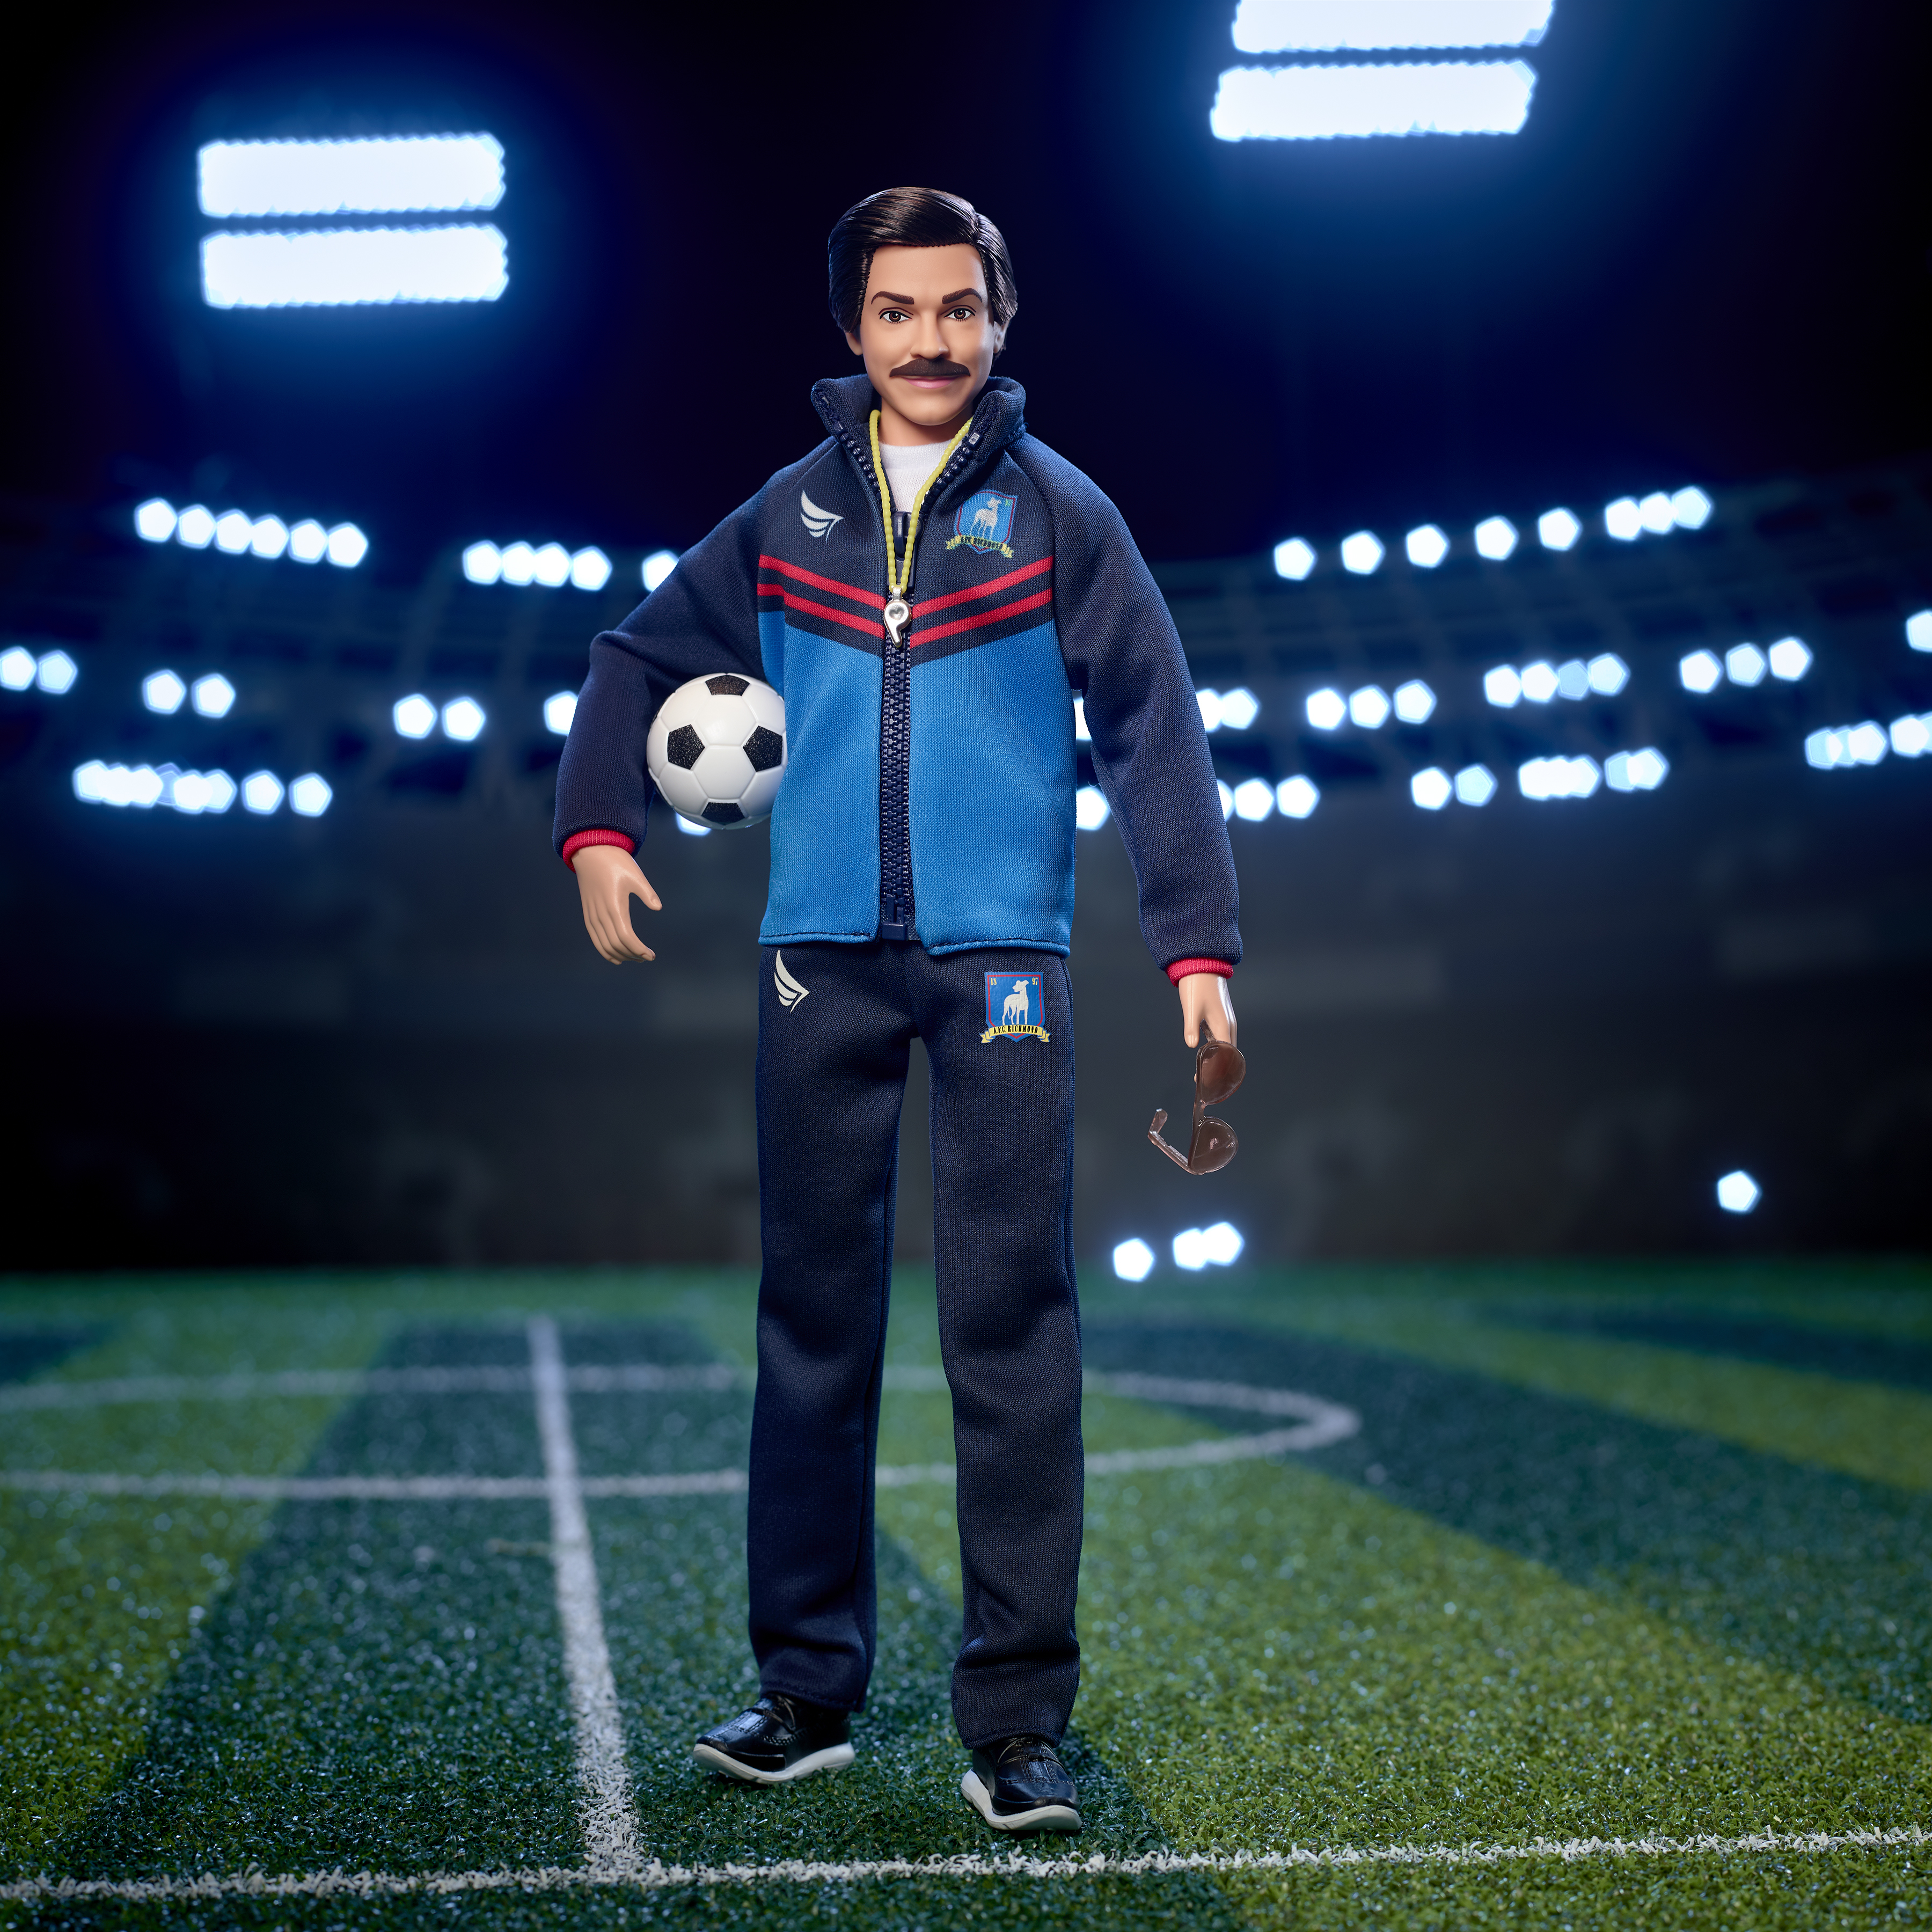 Ted Lasso Barbie doll stands on a soccer pitch holding a soccer ball under one arm and a pair of sunglasses in one hand